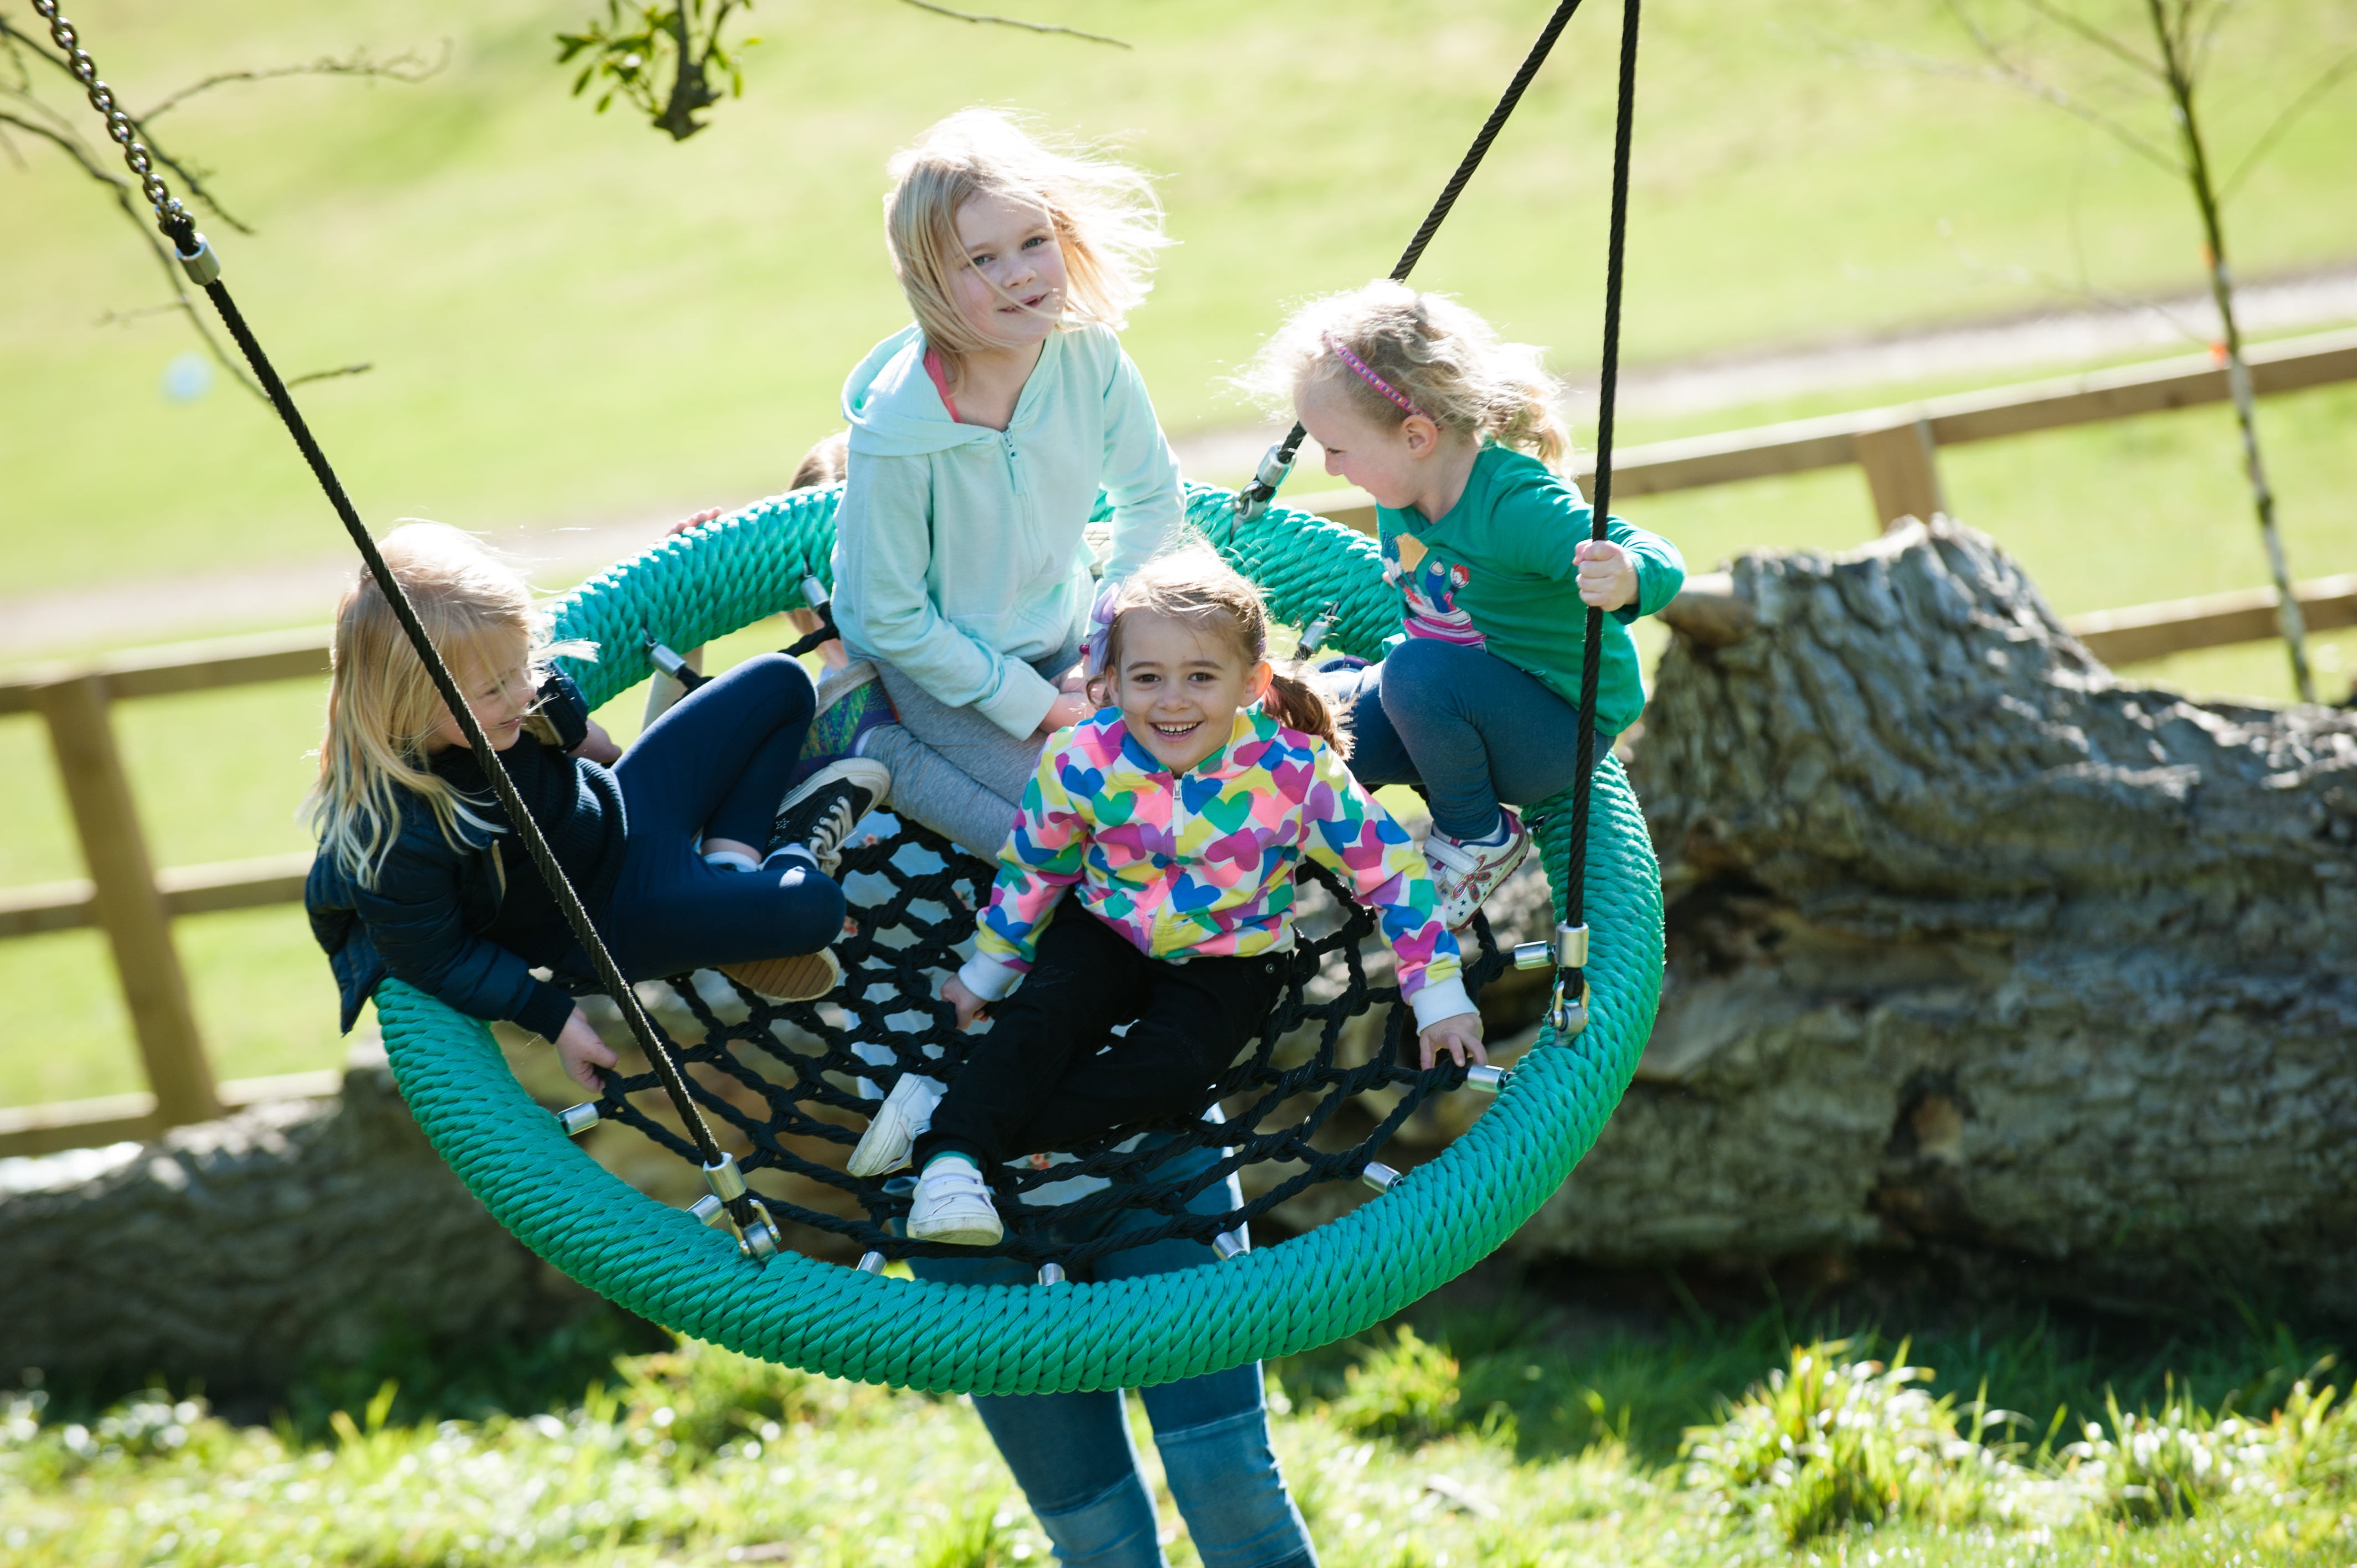 A basket swing that is ever popular the cradle nest swing allows children to join together for play fun